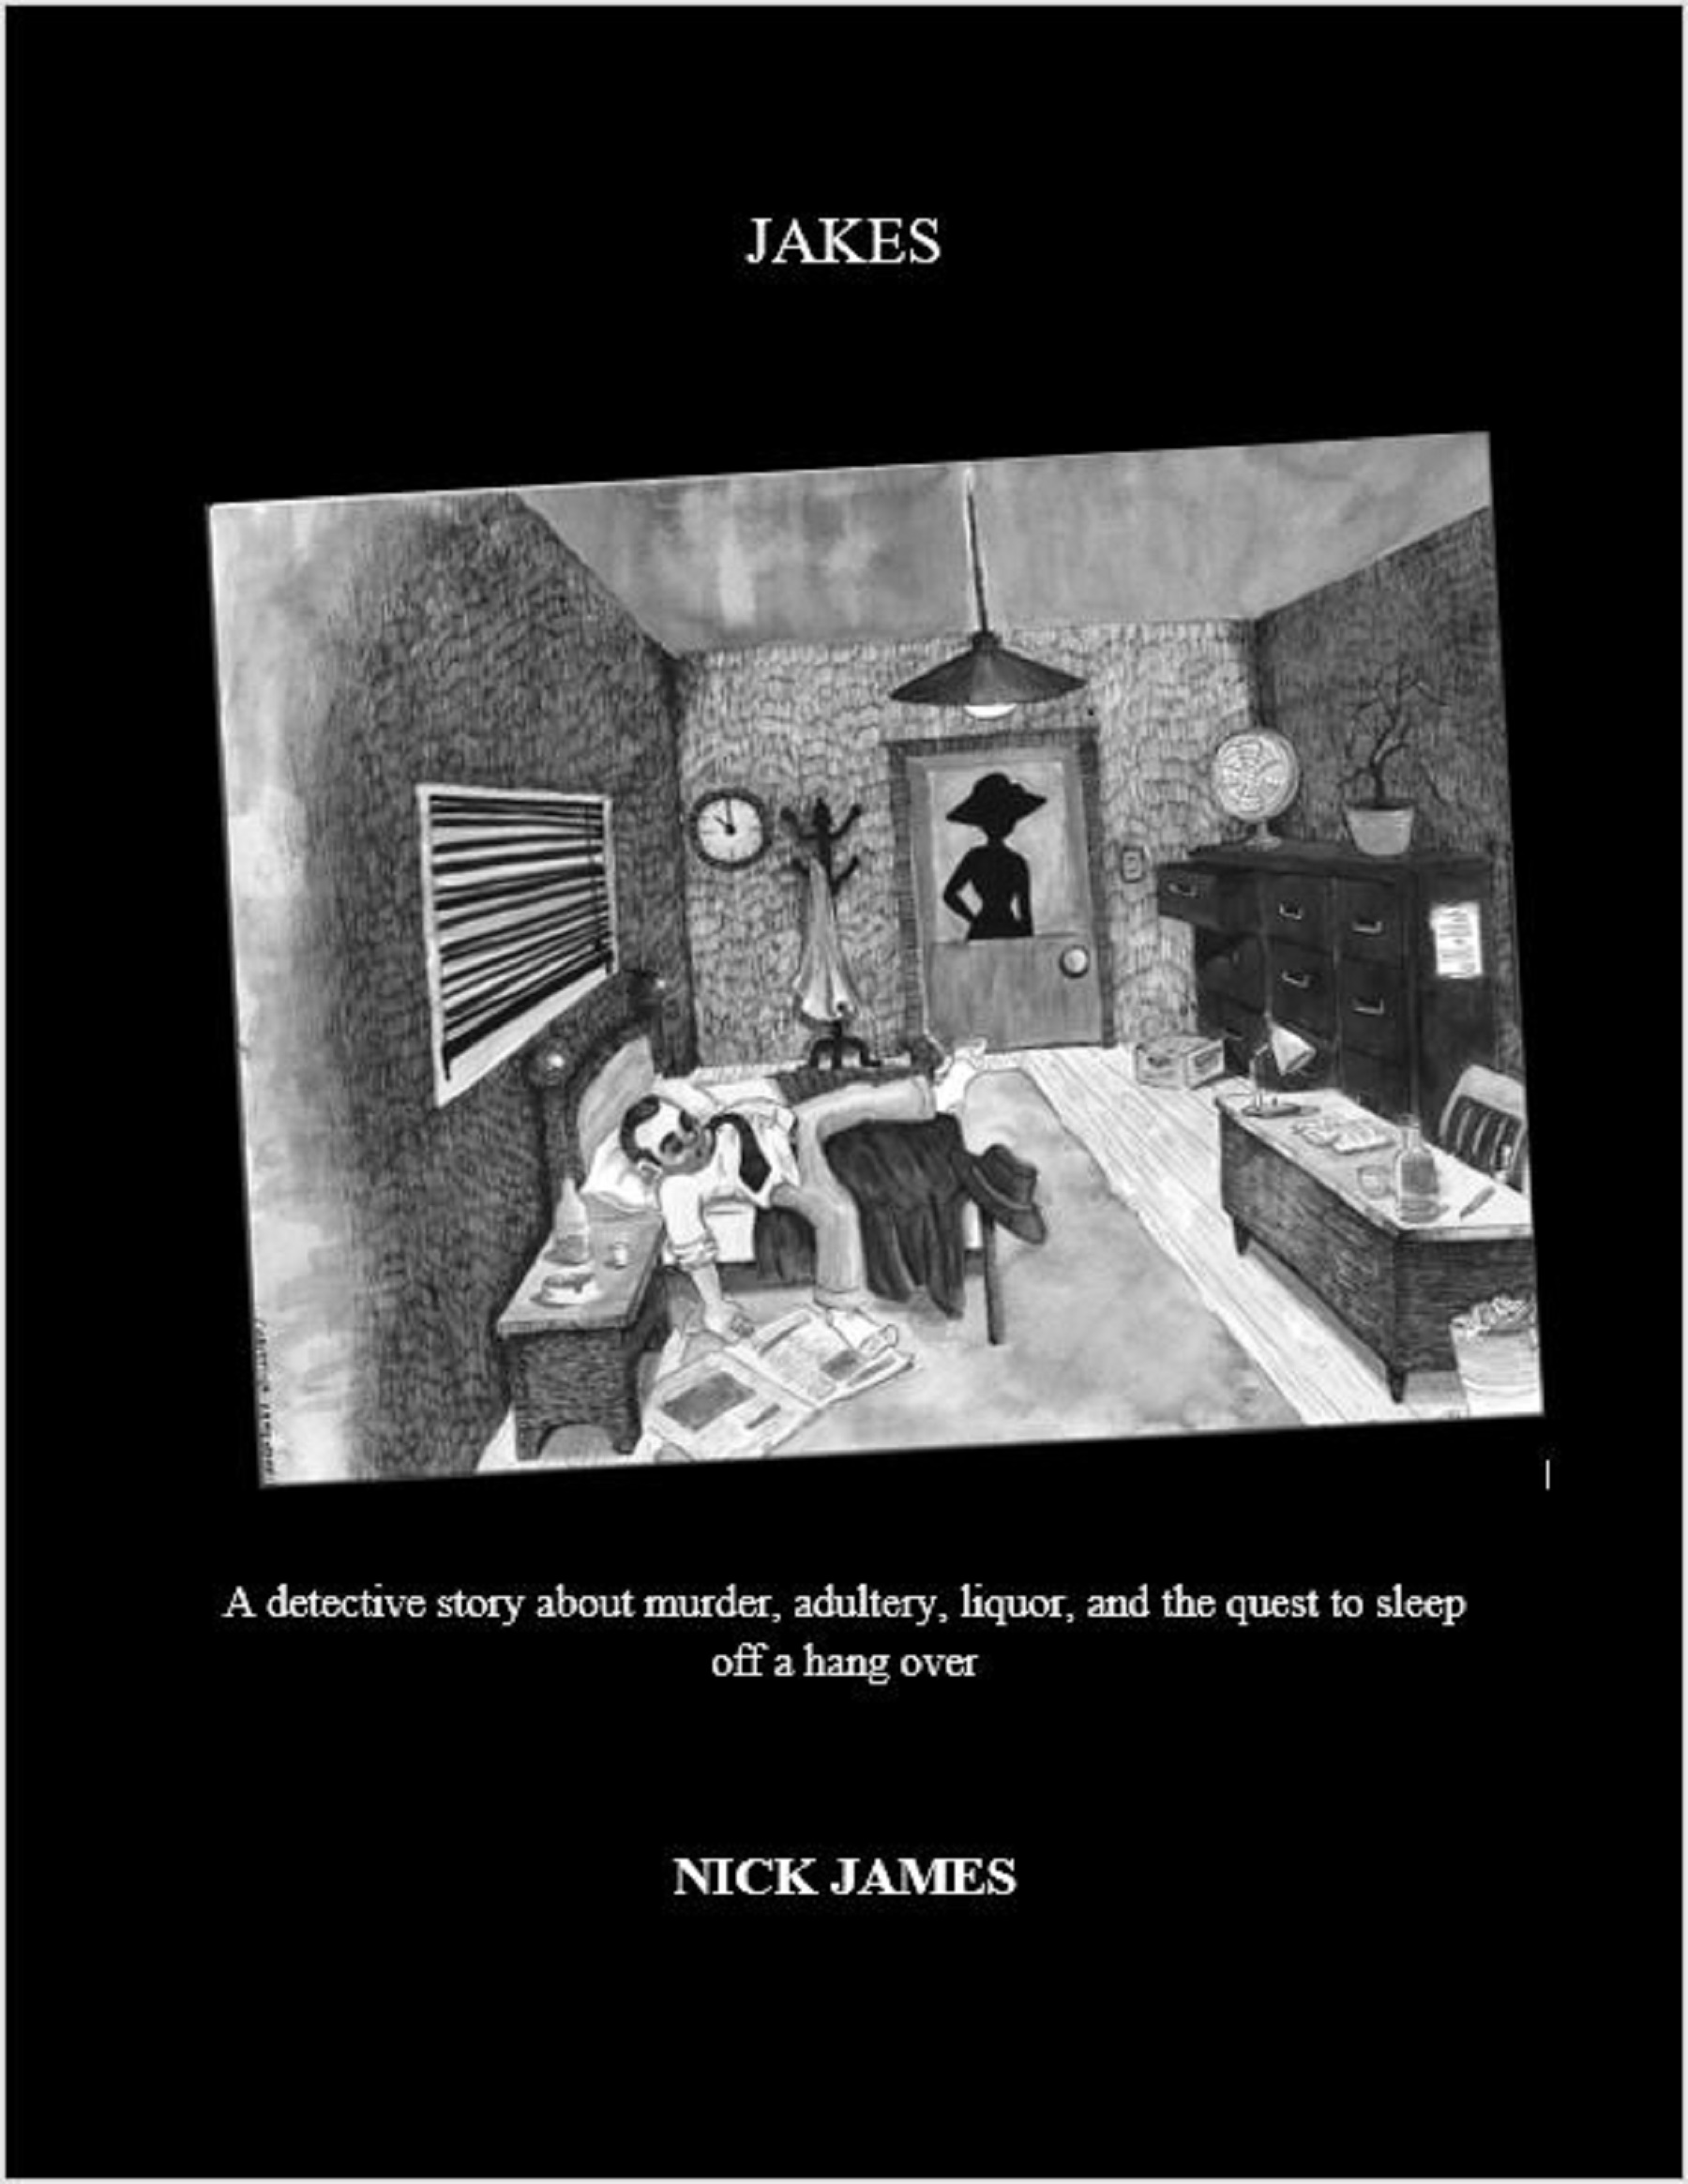 FREE: Jakes: A detective story involving murder, adultery, liquor, and the quest to sleep off a hangover by Nick James